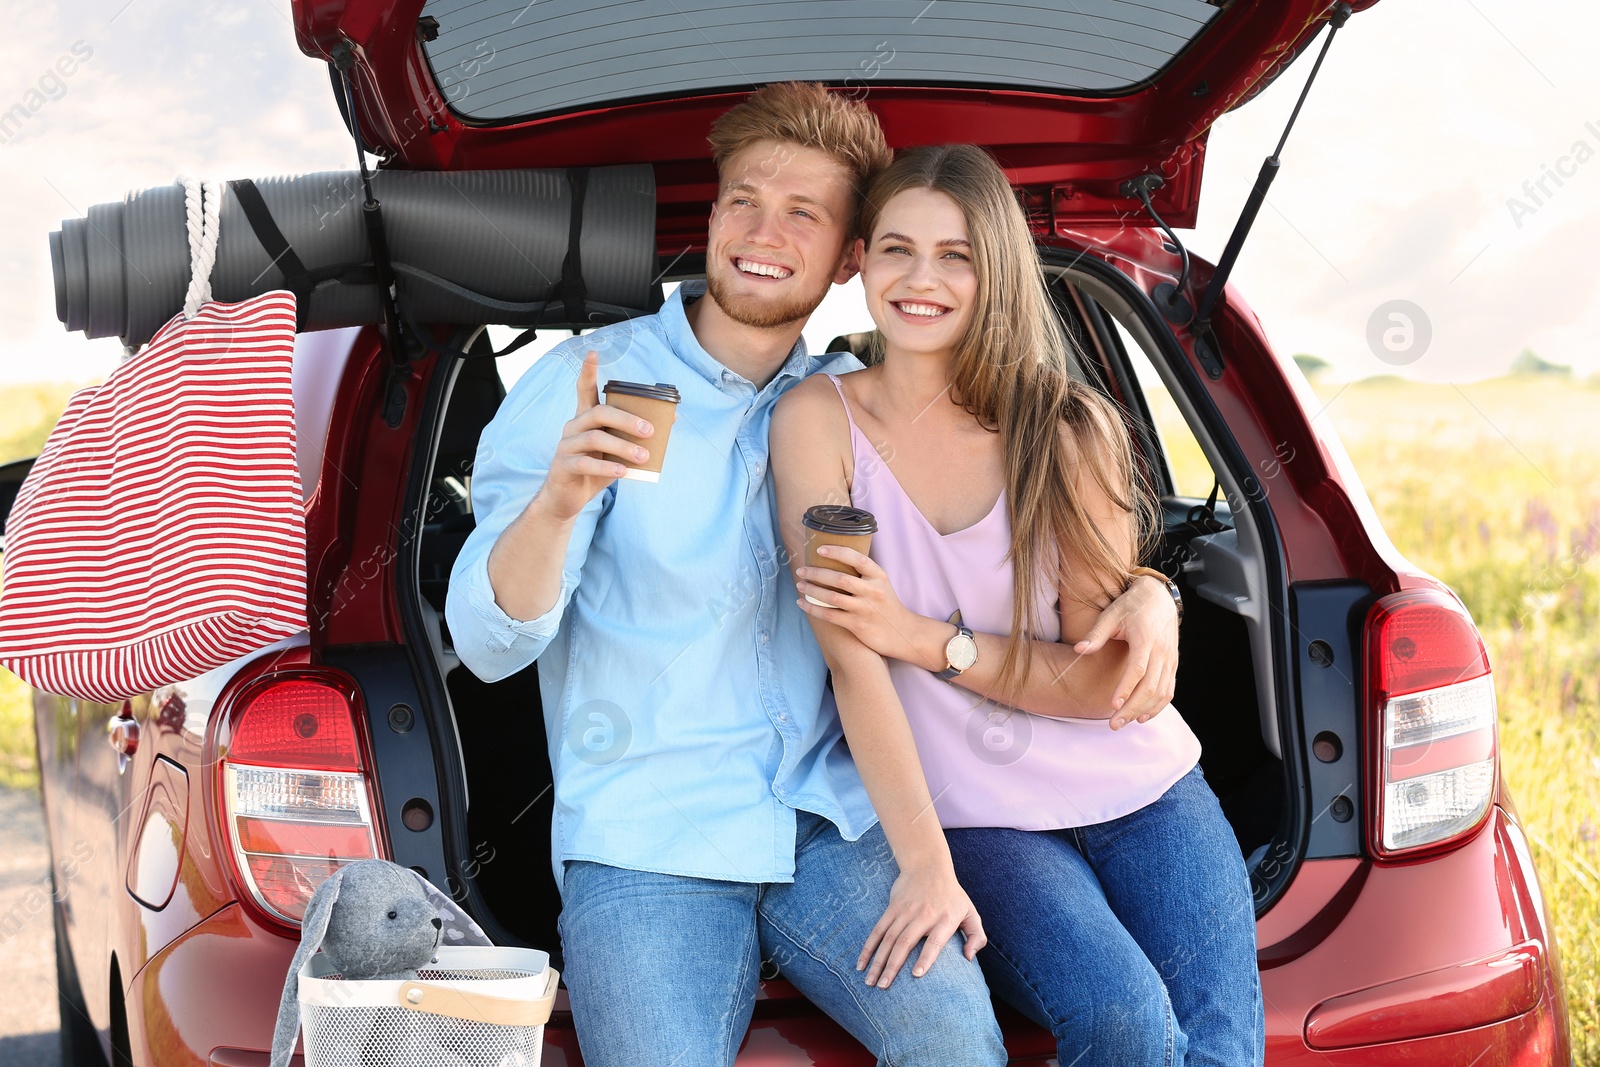 Photo of Young couple with luggage near car trunk outdoors